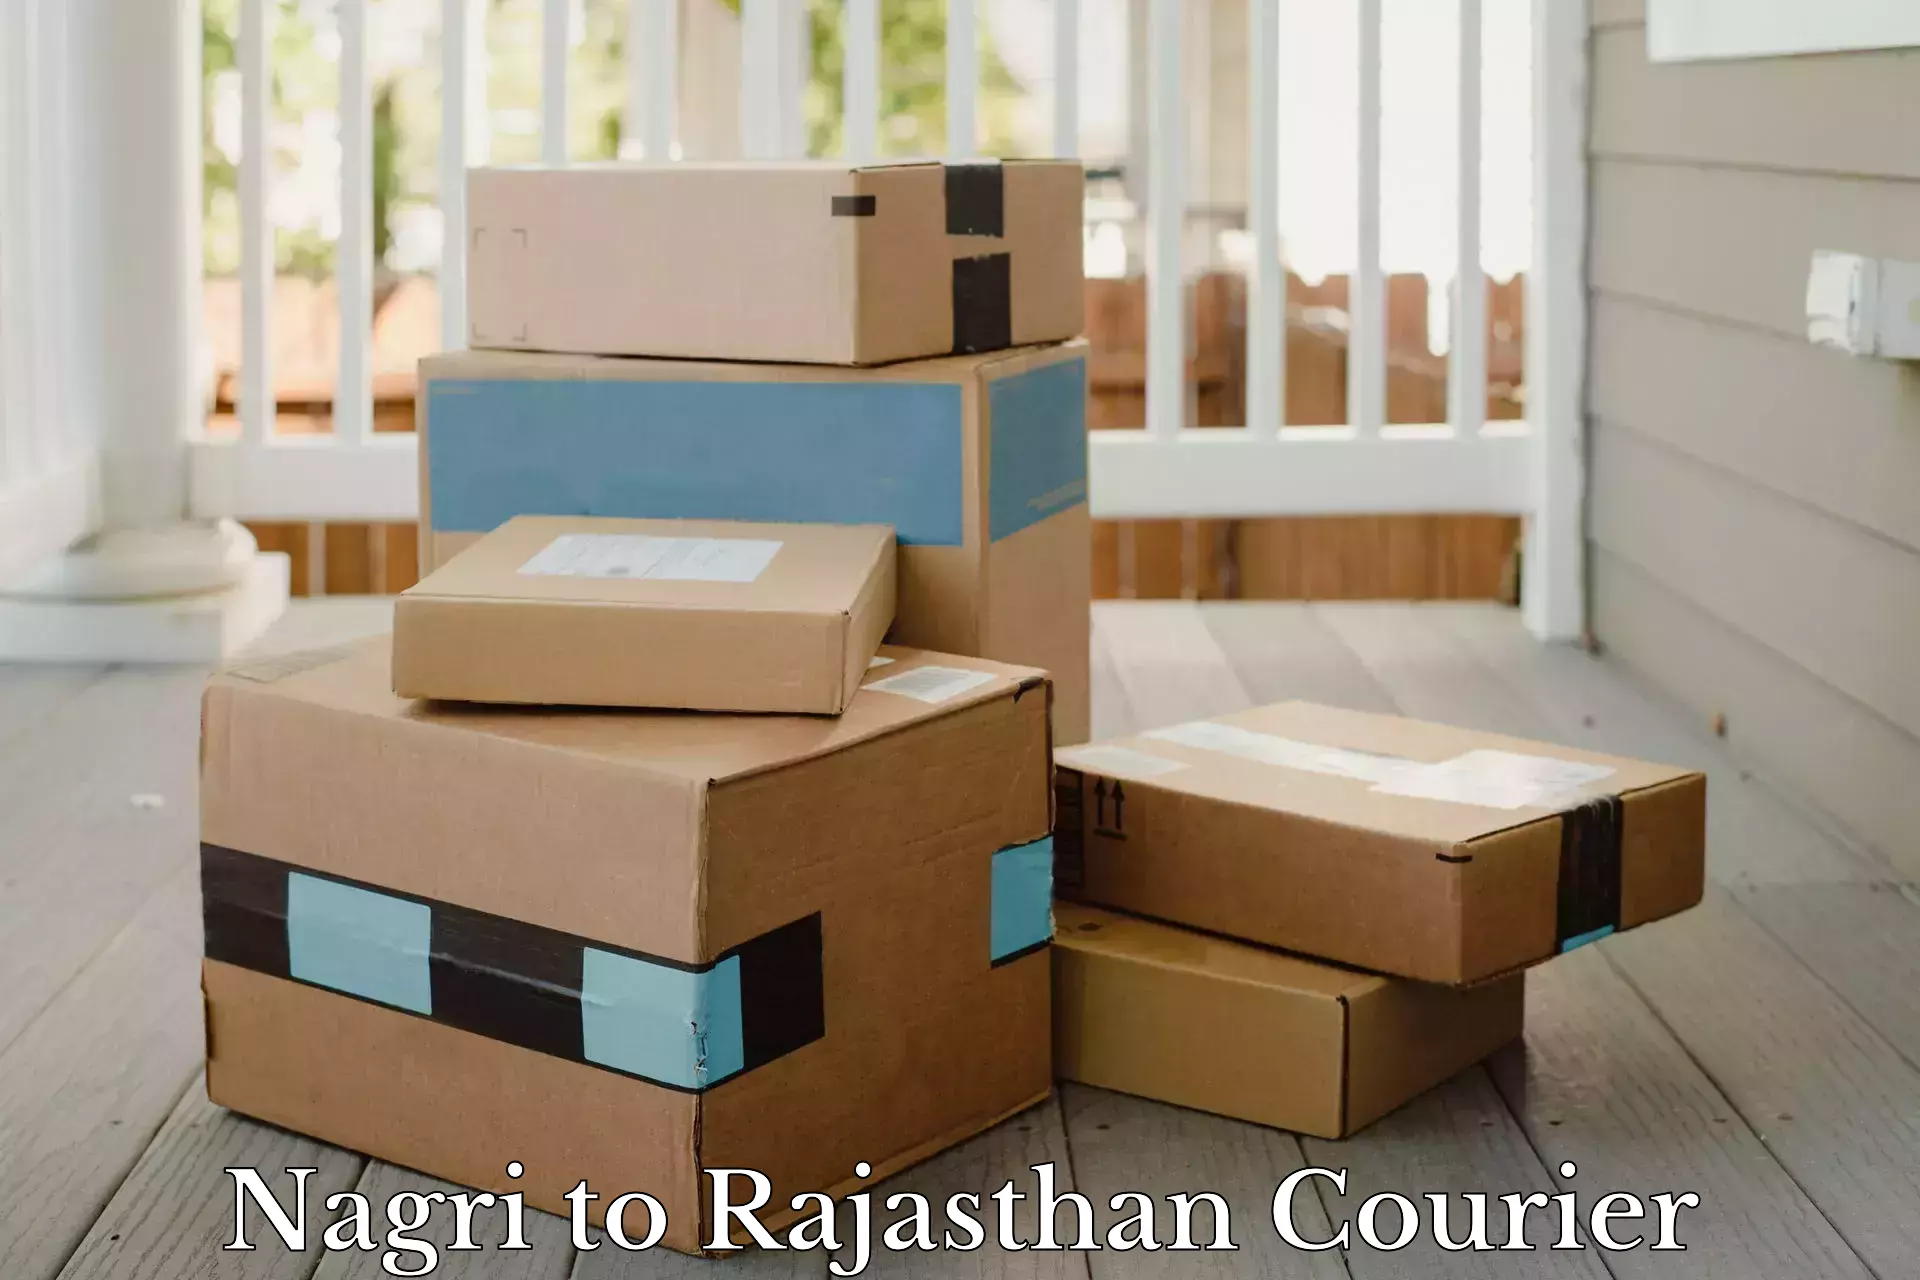 Supply chain delivery Nagri to Rajasthan